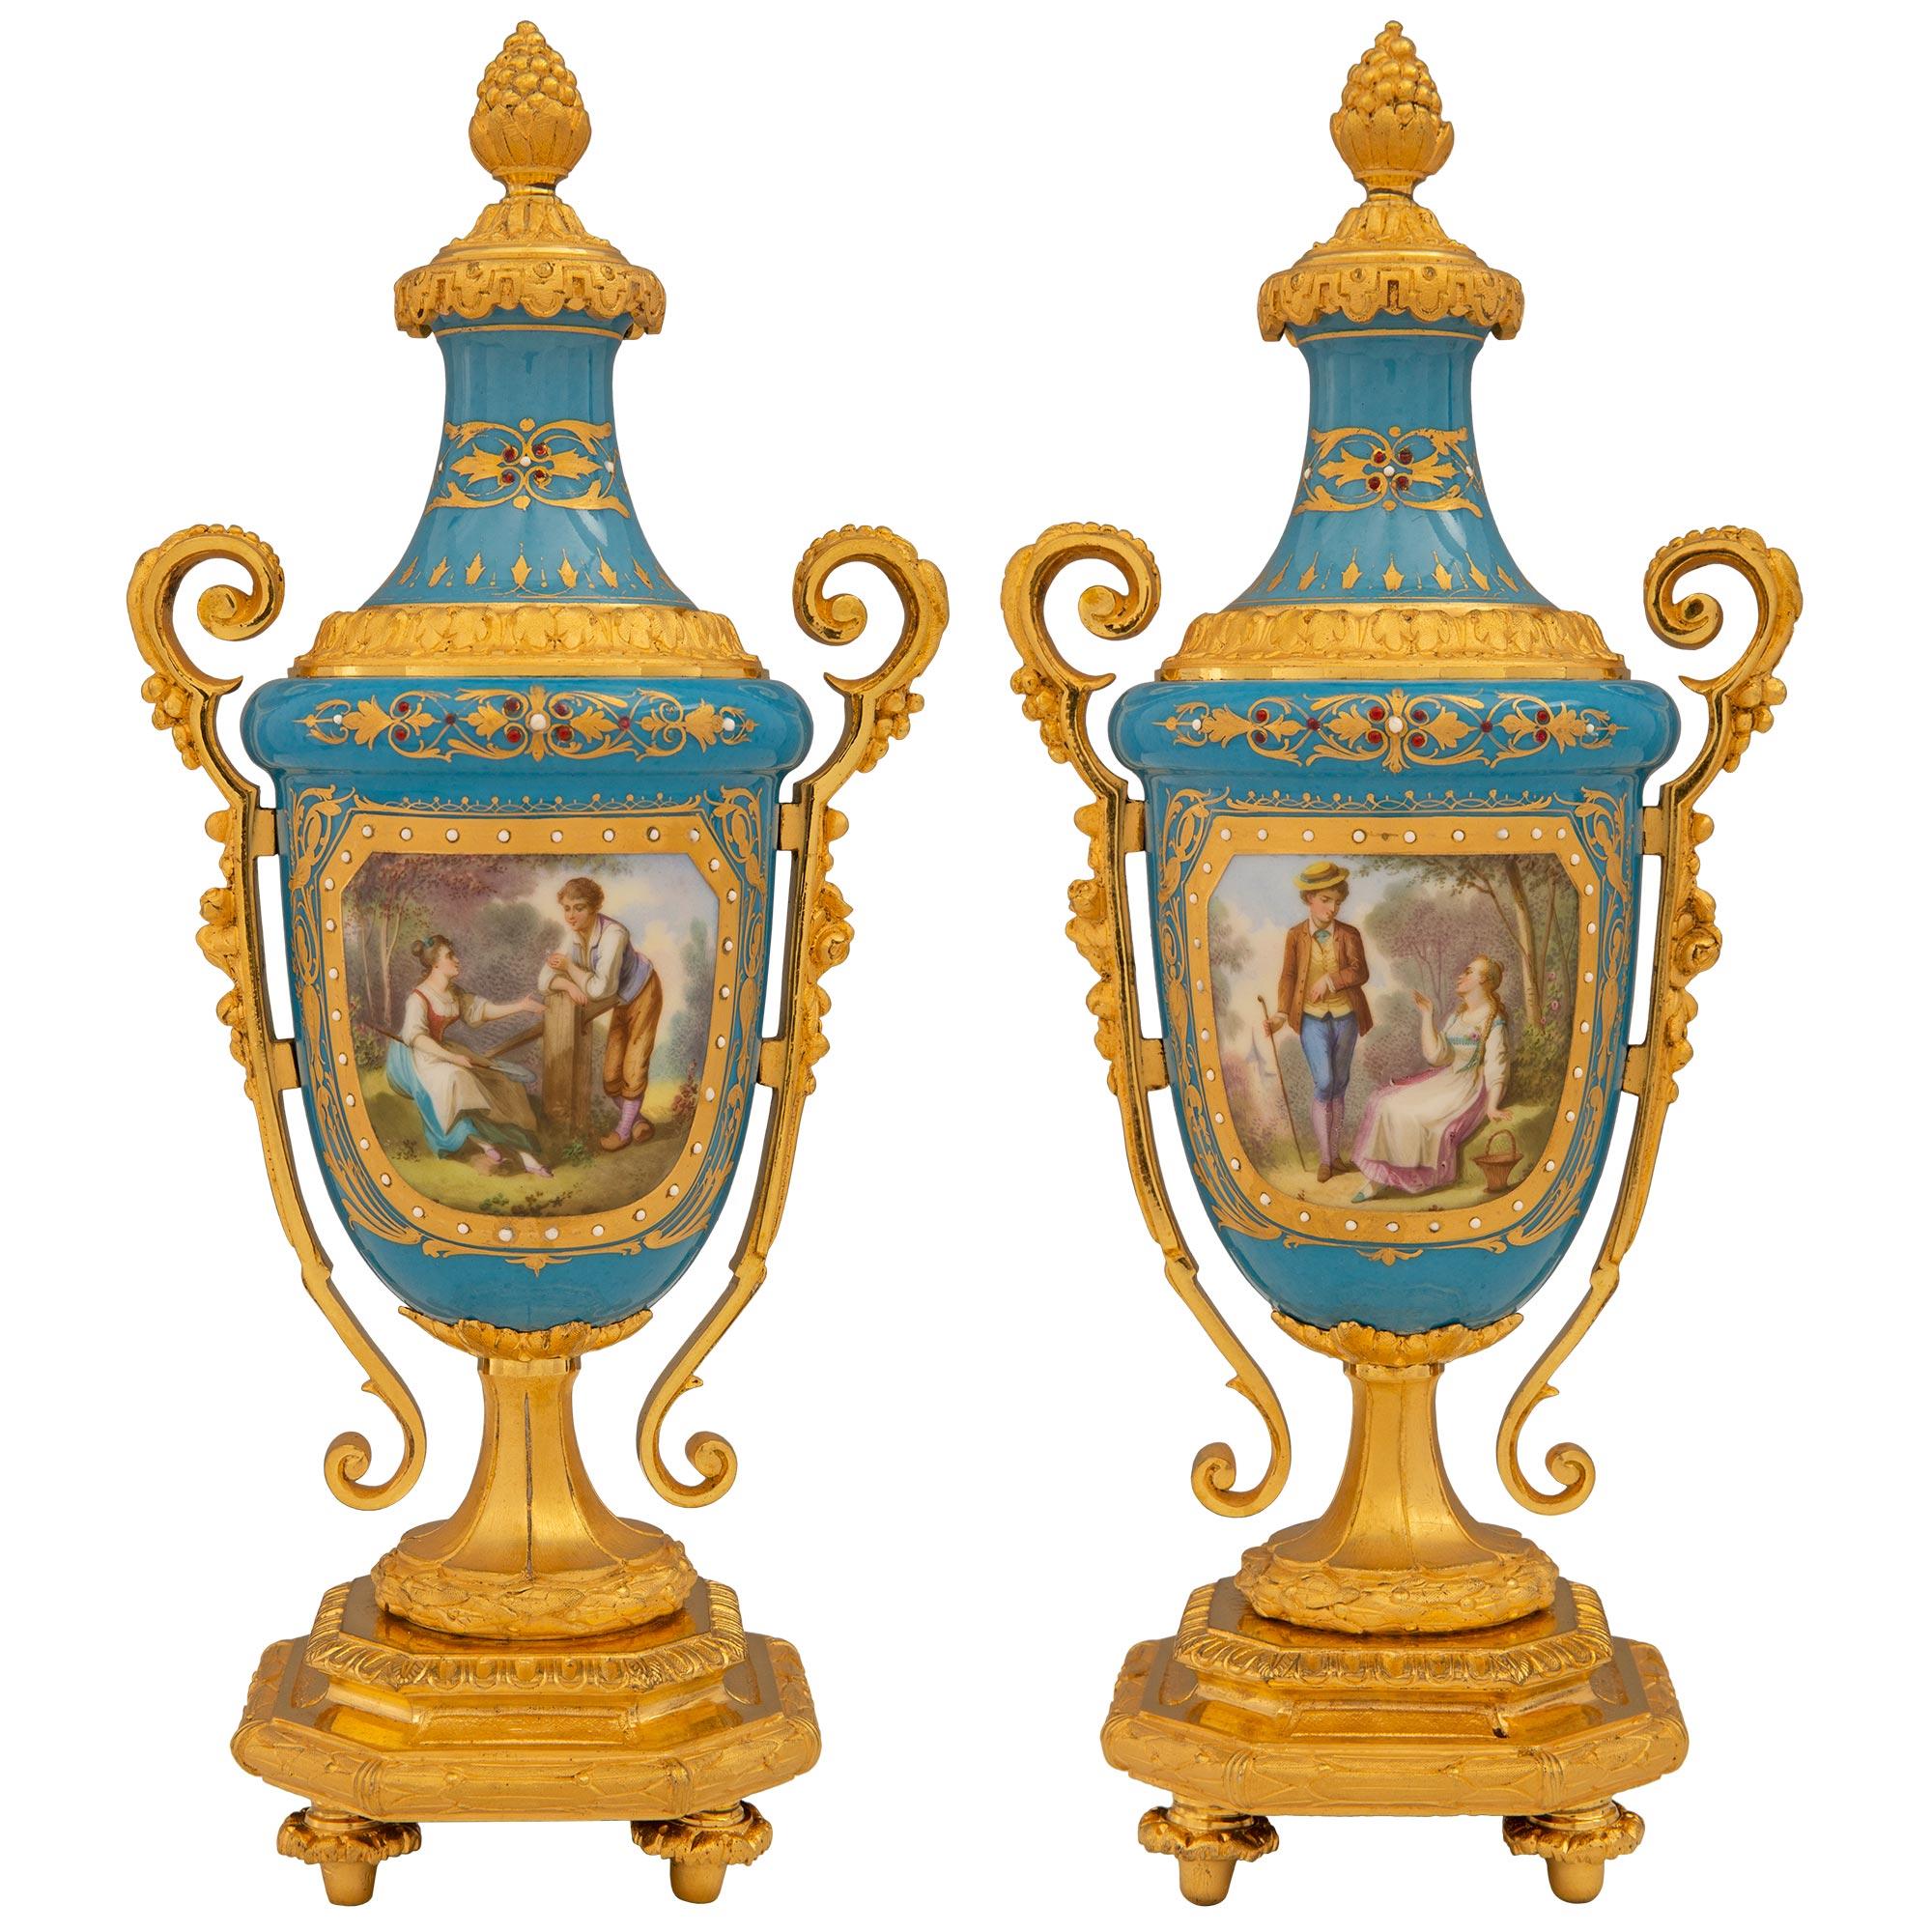 Pair Of French 19th Century Louis XVI St. Sèvres Porcelain & Ormolu Lidded Urns For Sale 8